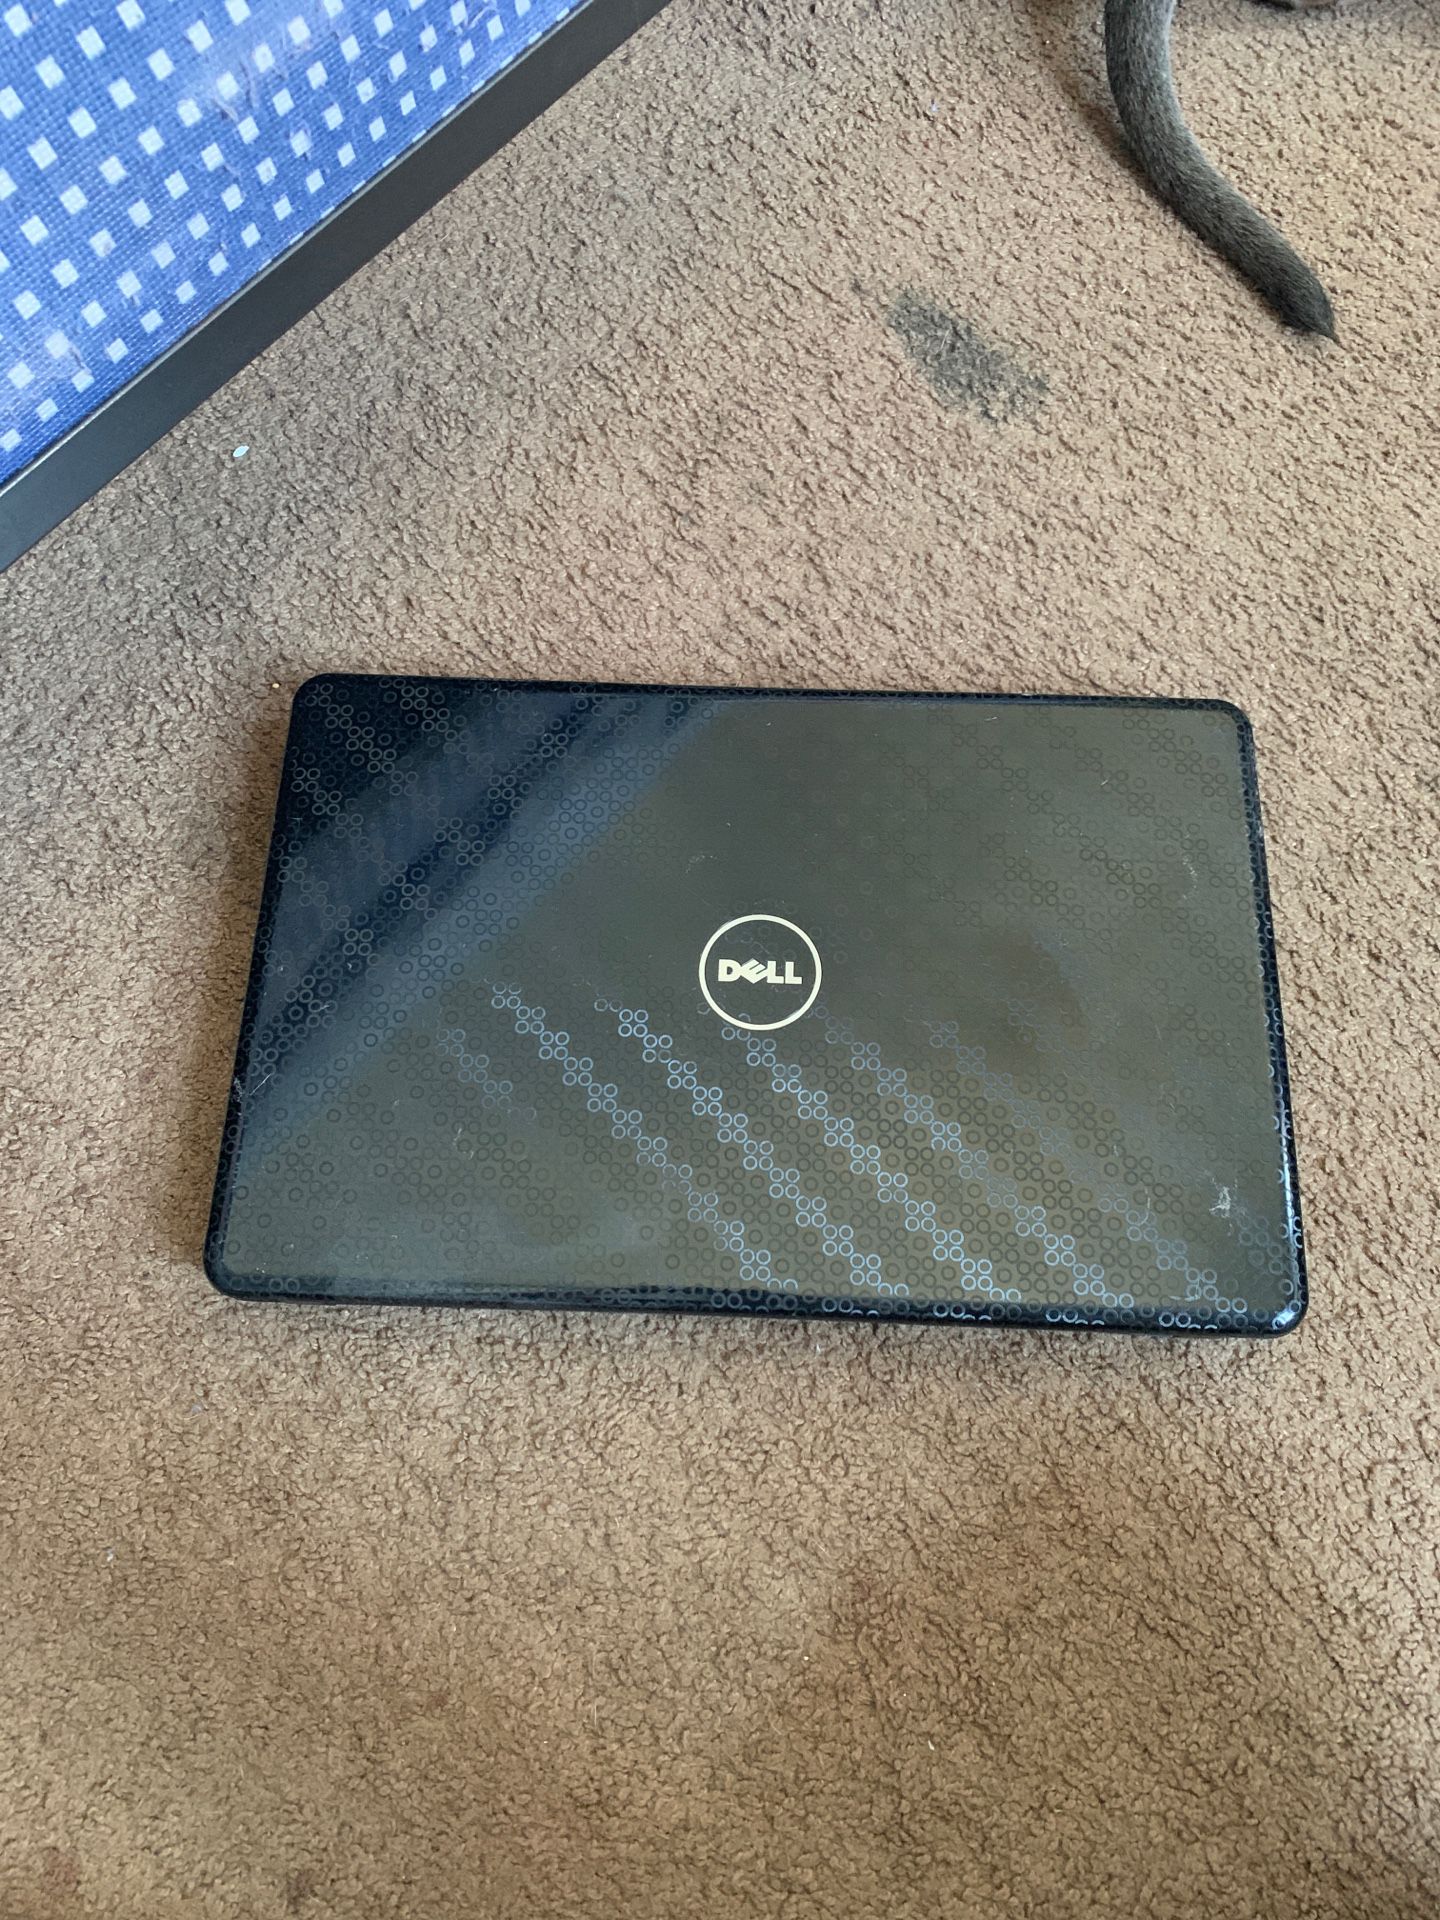 Dell Inspiron with windows 7